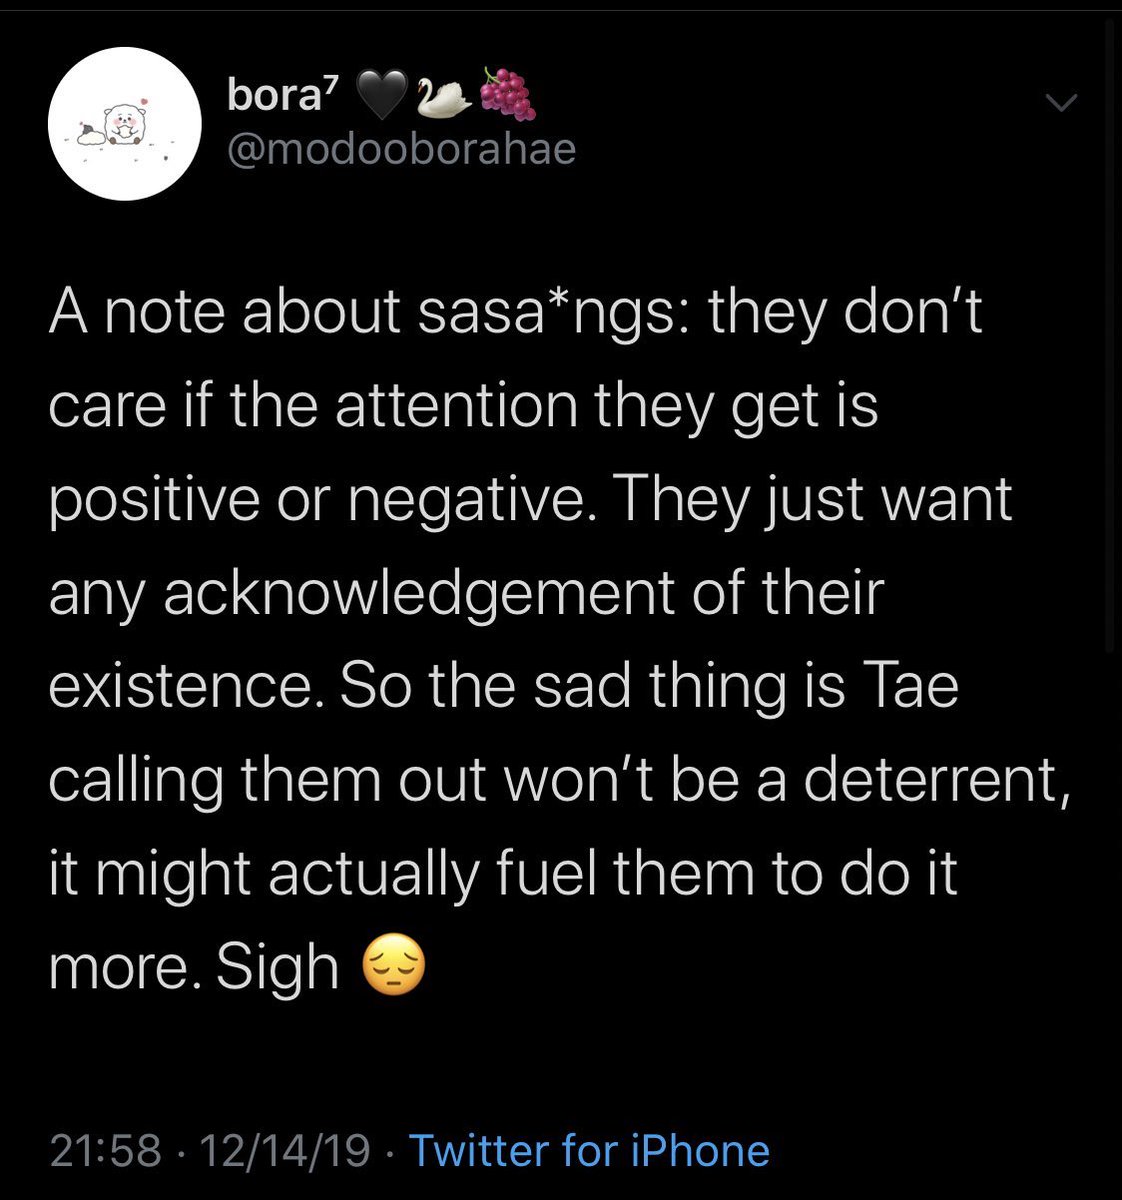 Bora criticized T/H for speaking up about how sasaengs make him uncomfortable during a vlive. For the past 7 years, the members have had numerous bad experiences with sasaengs, so it’s extremely disrespectful to invalidate their rightful feelings and complaints.